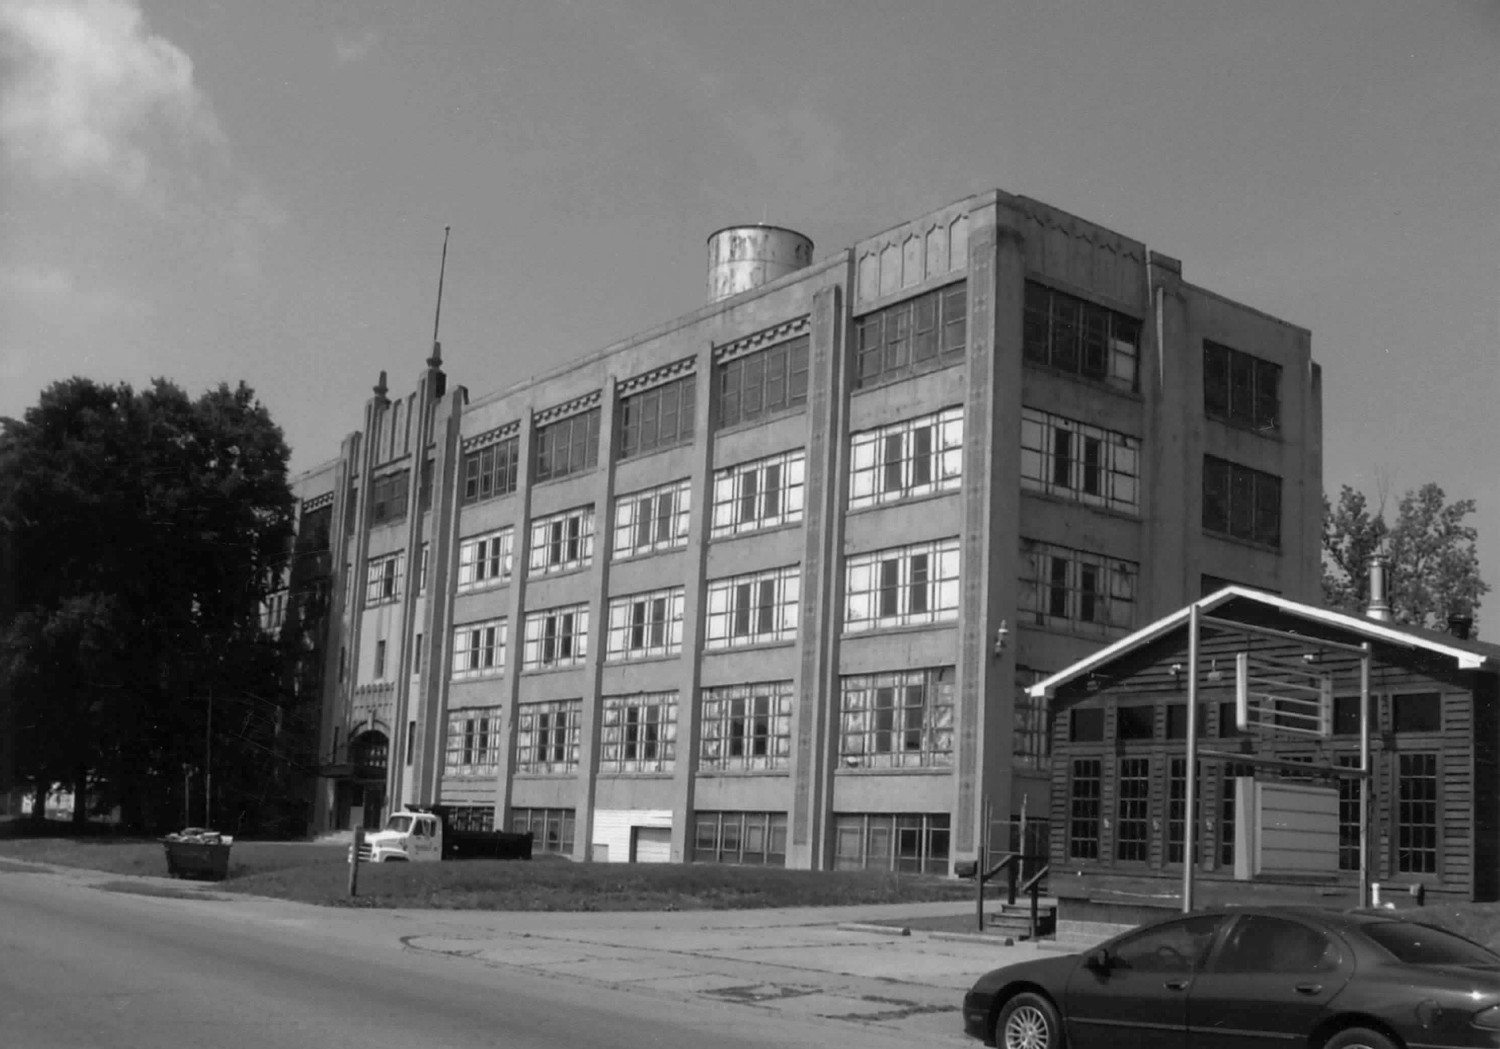 Selby Shoe Company Building, Ironton Ohio Facade (West) and South Elevations looking northeast (2008)